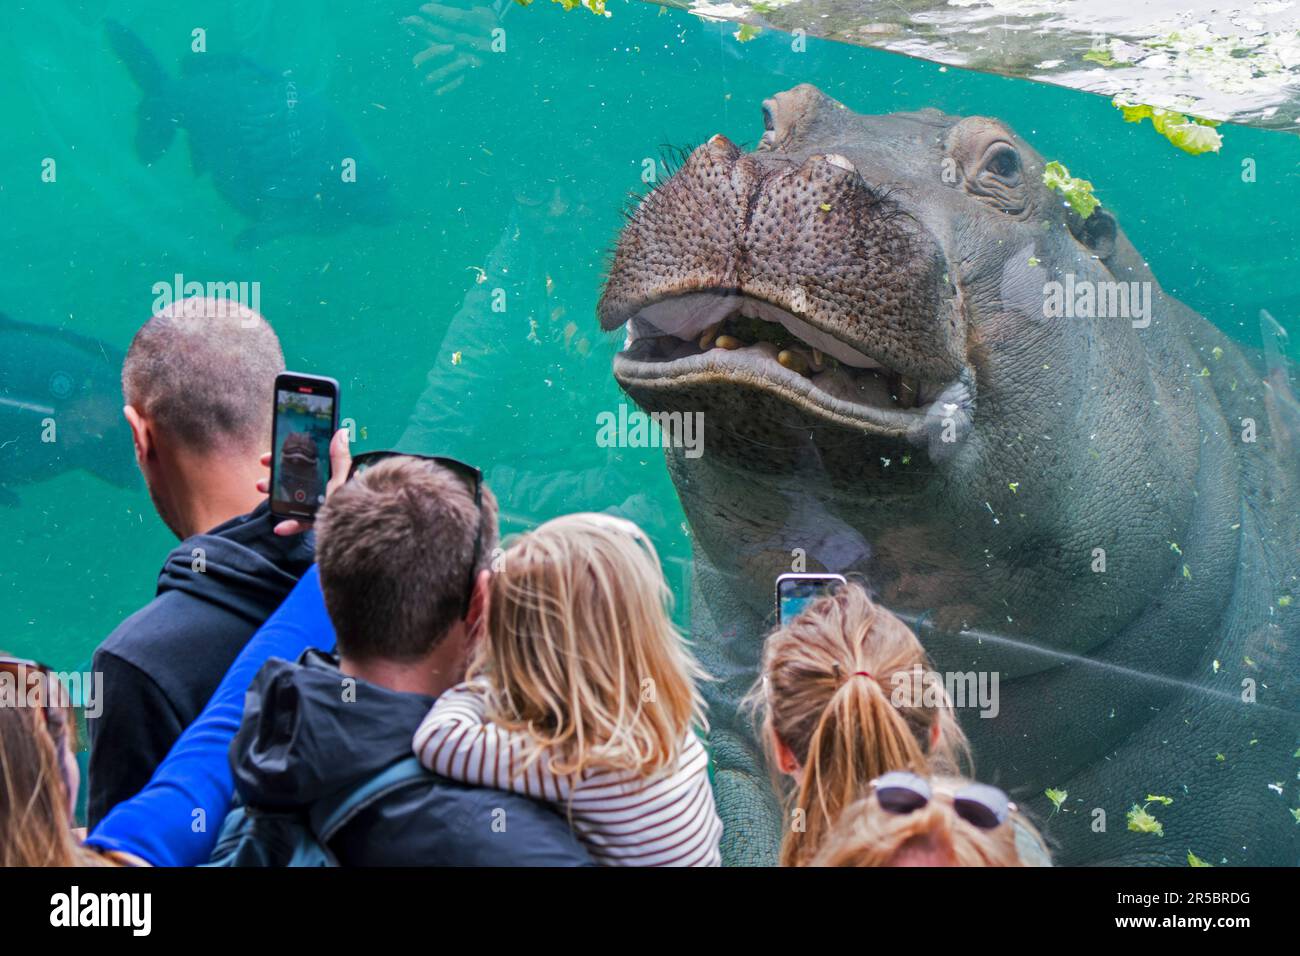 Zoo visitors taking pictures with their smartphones of hippo swimming underwater at the ZooParc de Beauval, zoological park in France Stock Photo